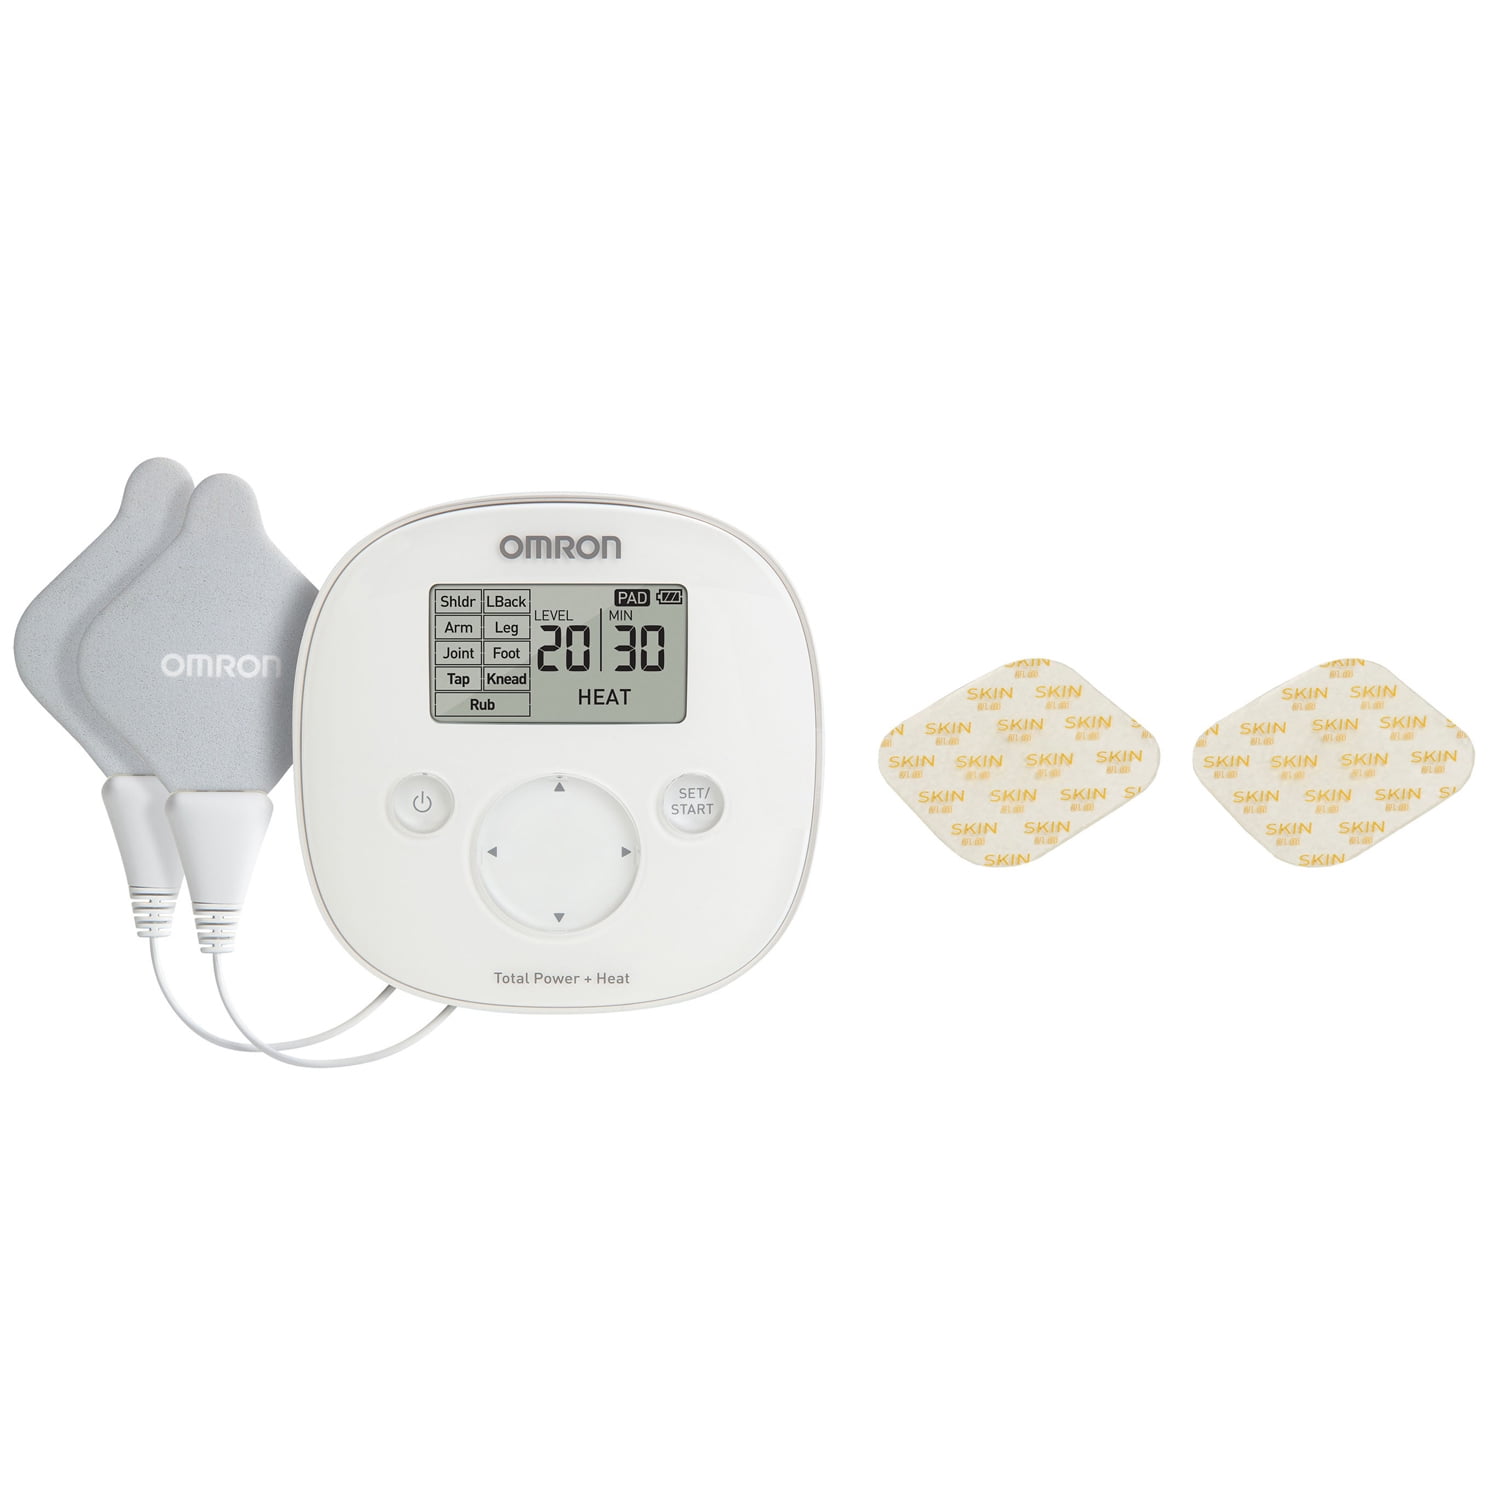 Omron PM800 Total Power + Heat Tens Device & Pmgel Heat Pain Pro Gel Refills, Size: Pads Are for Single Patient Use Only